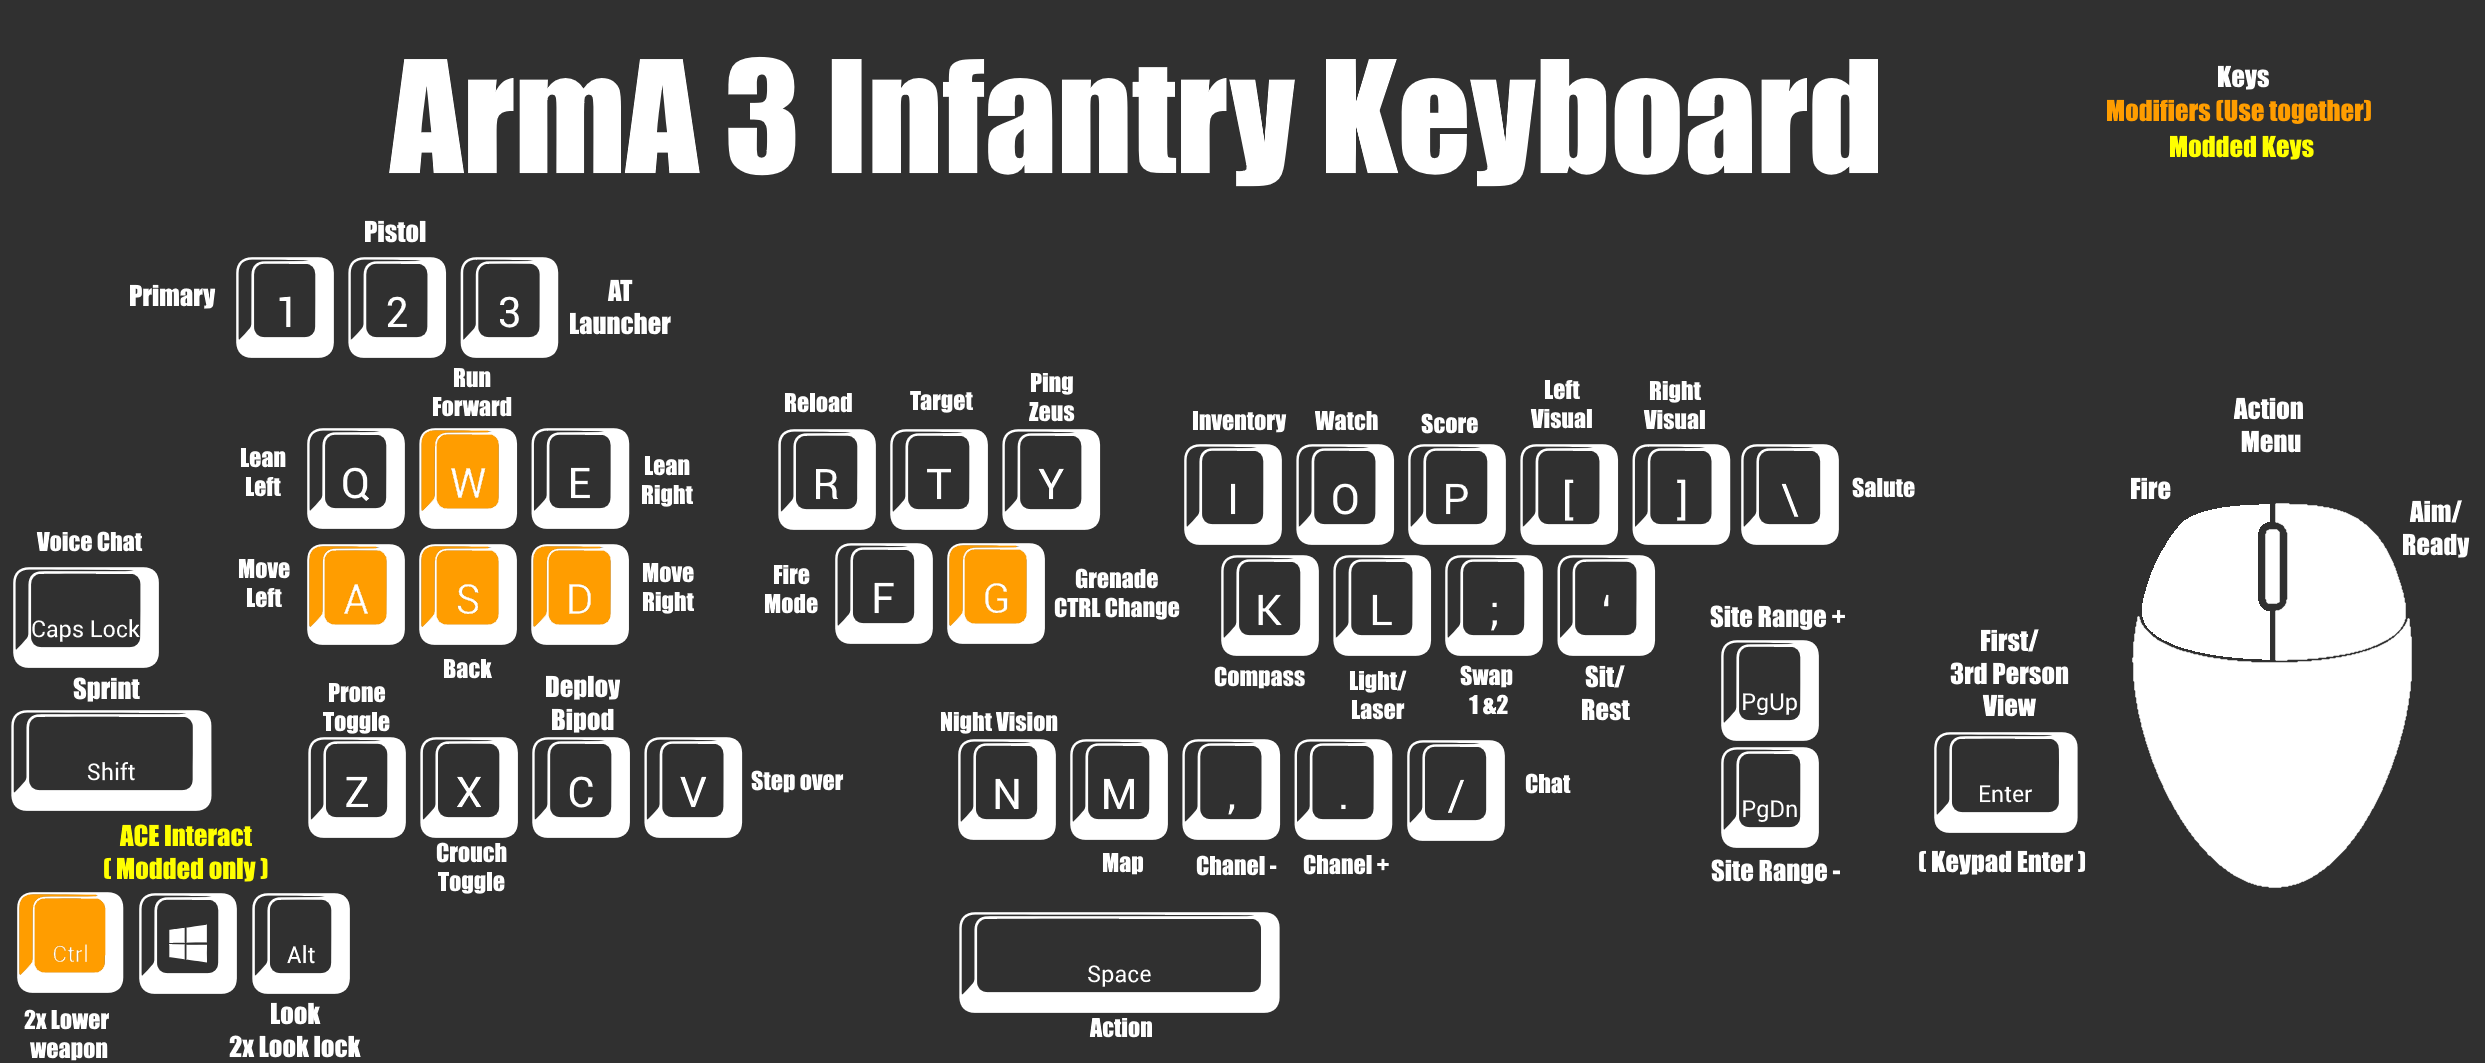 A3 Infantry Keybaord layout